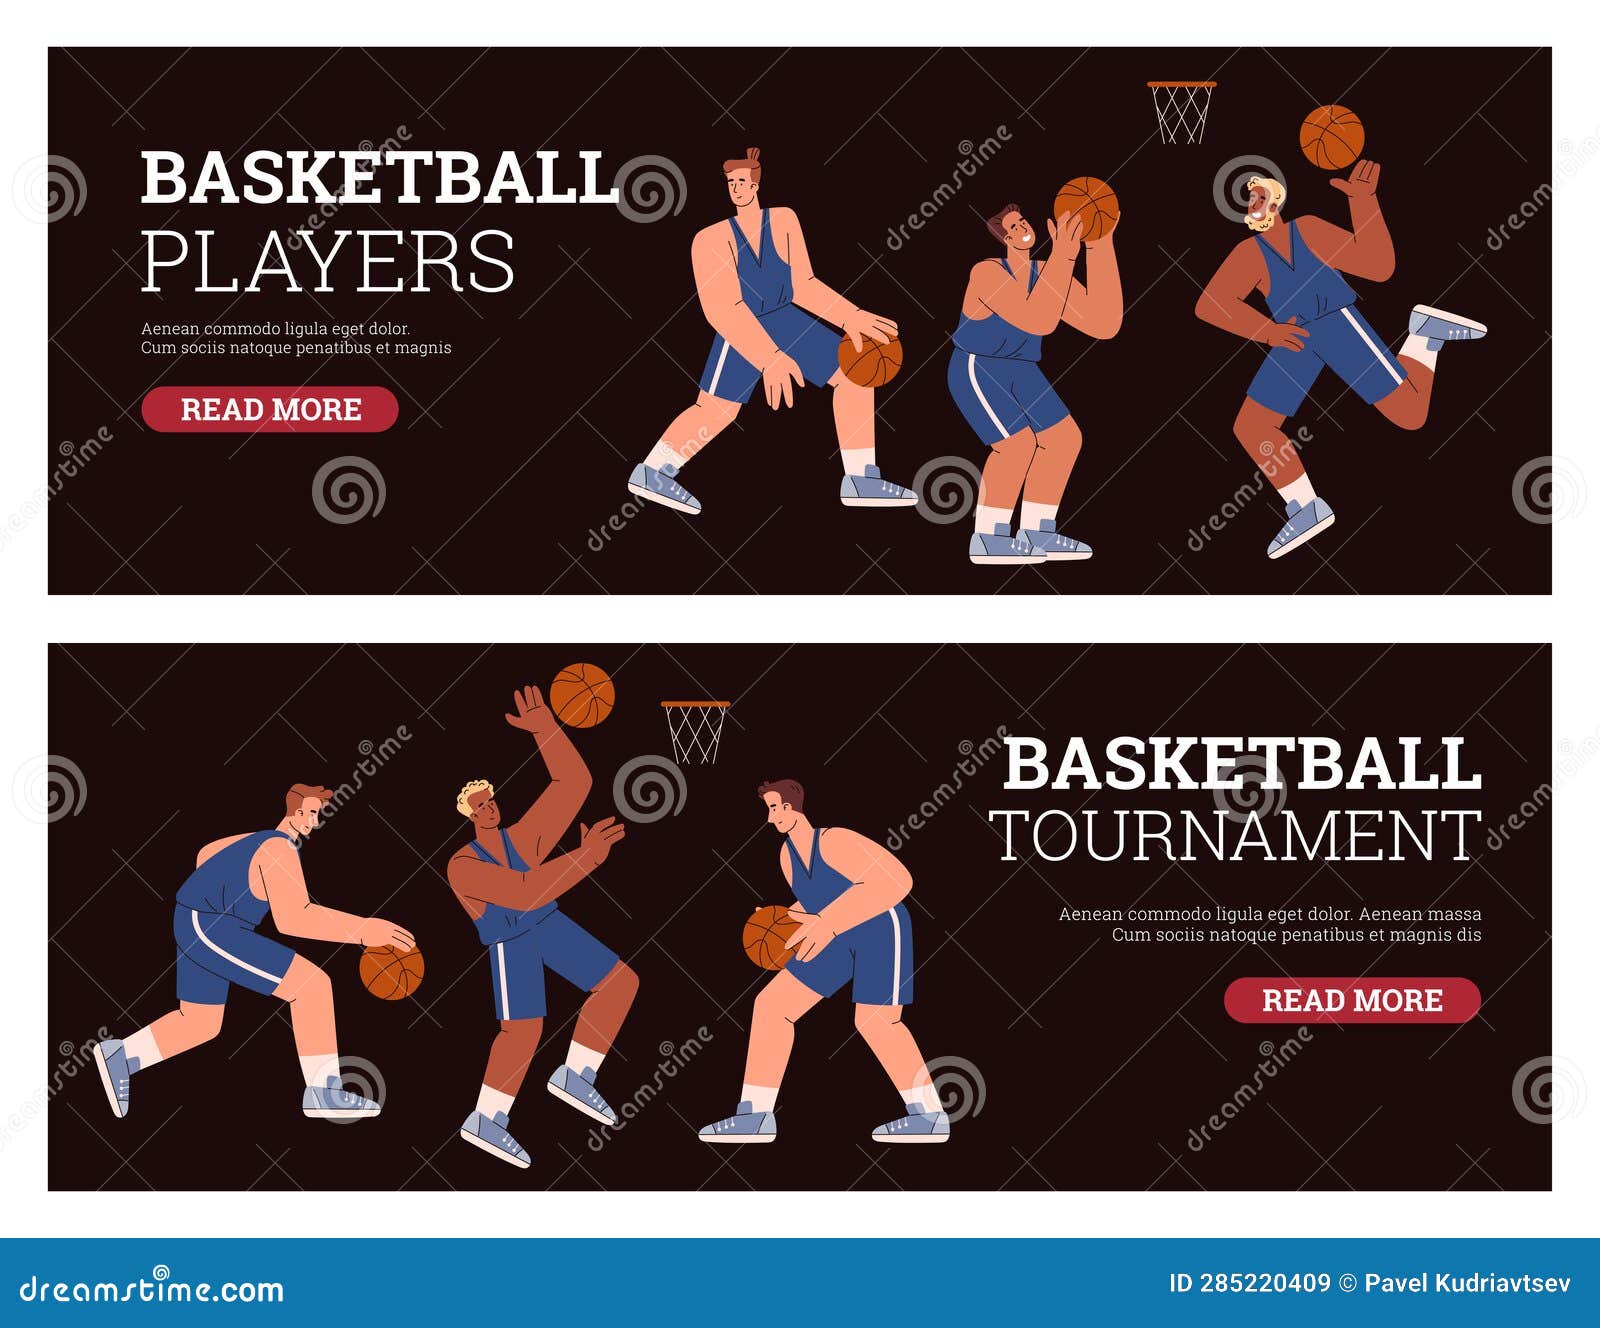 Basketball Banners or Flyers with Basketball Players, Flat Vector ...